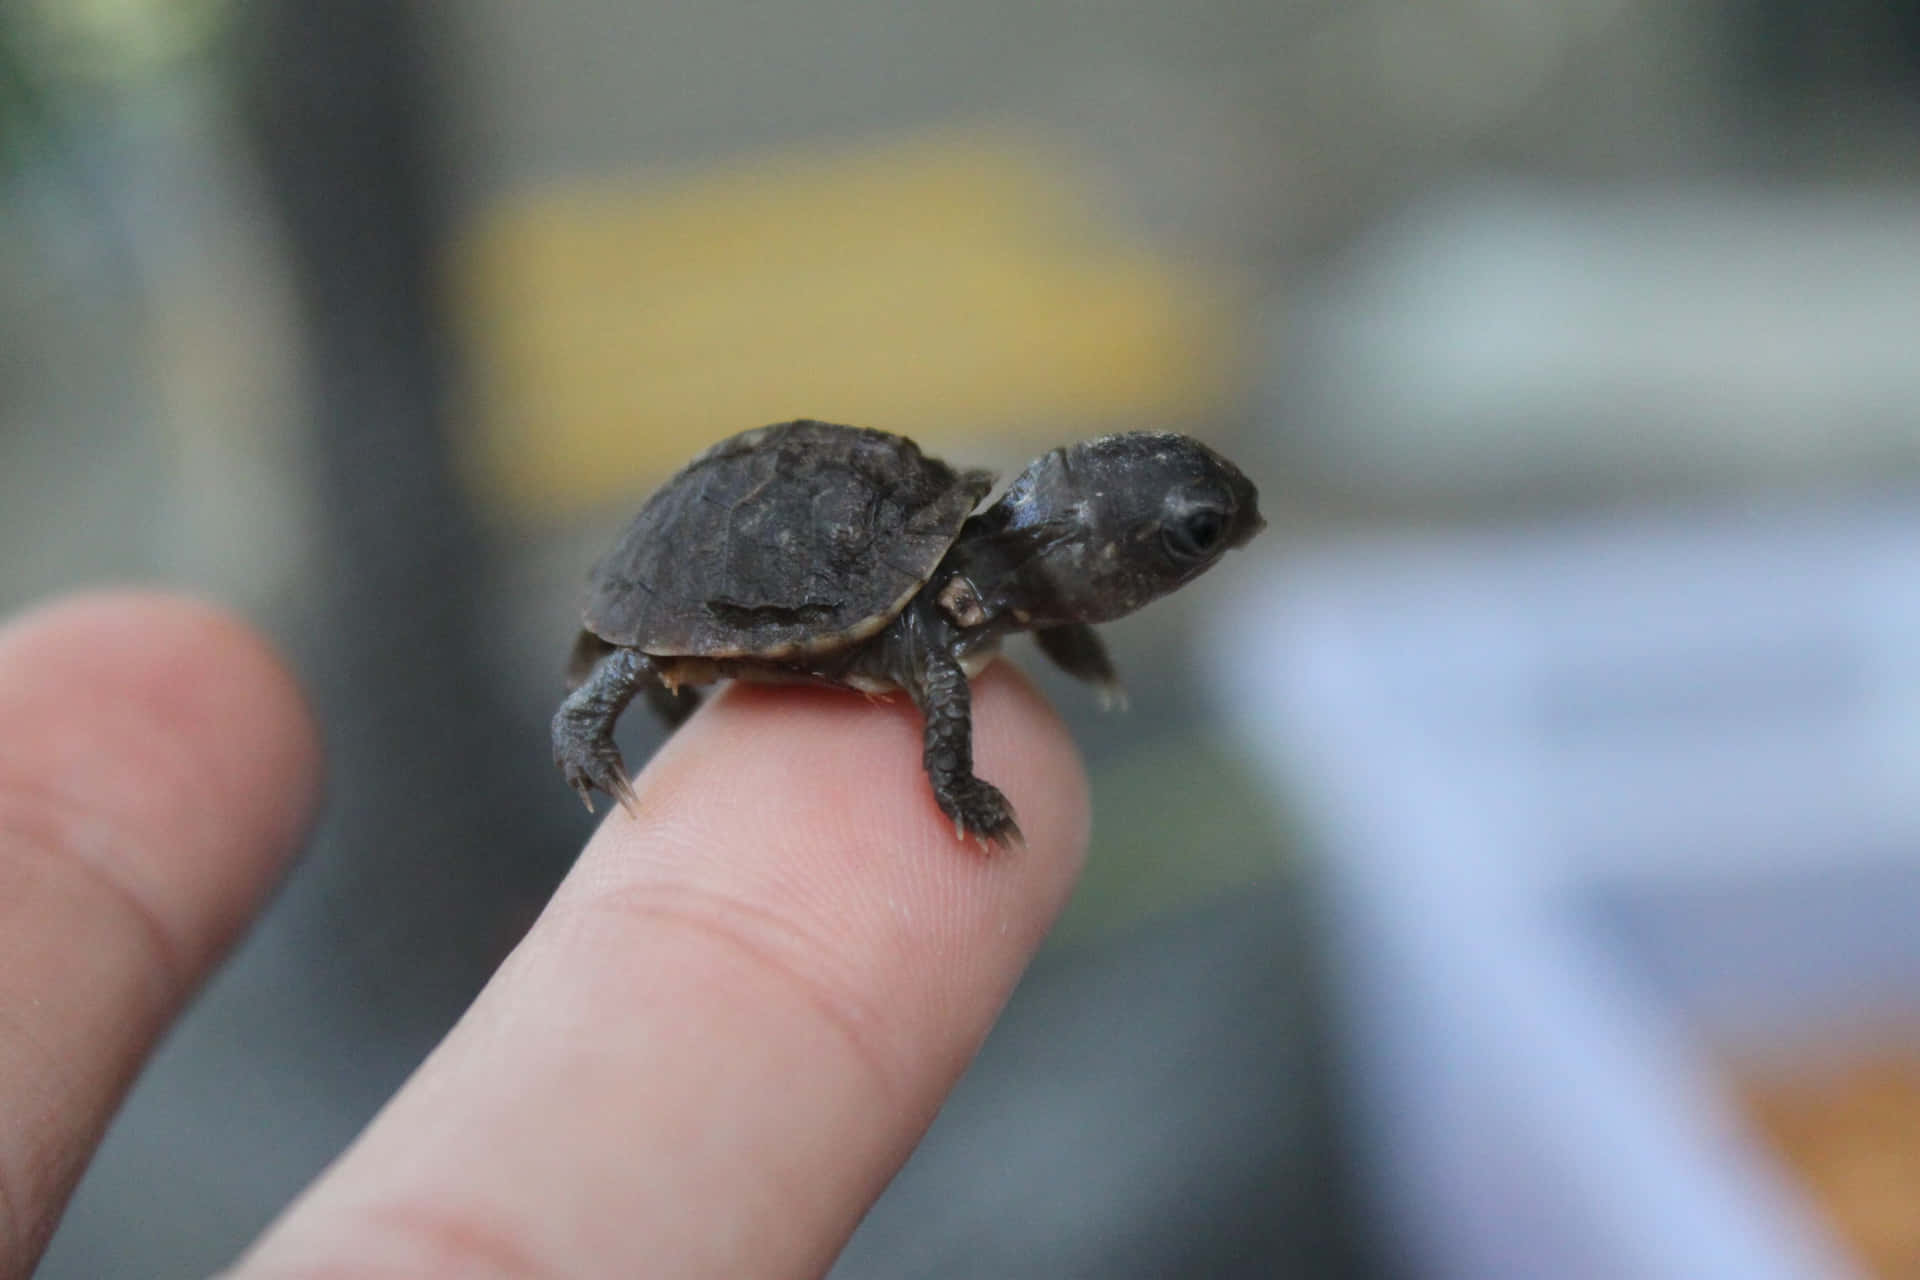 Look at this adorable little turtle!